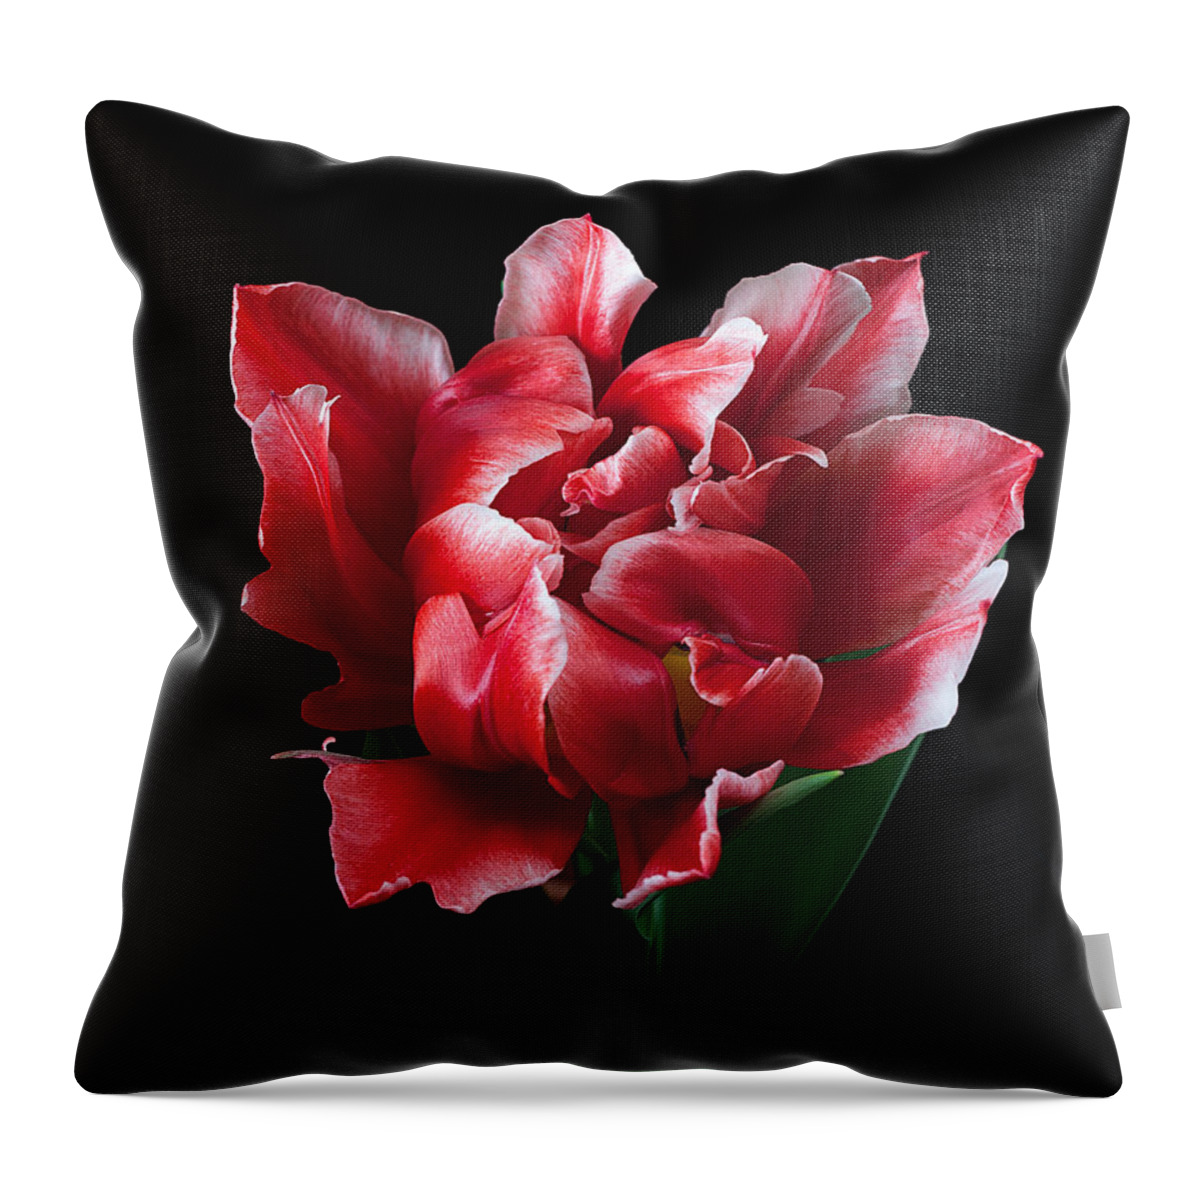 Flower Throw Pillow featuring the photograph Rare Tulip Willemsoord by Ann Jacobson